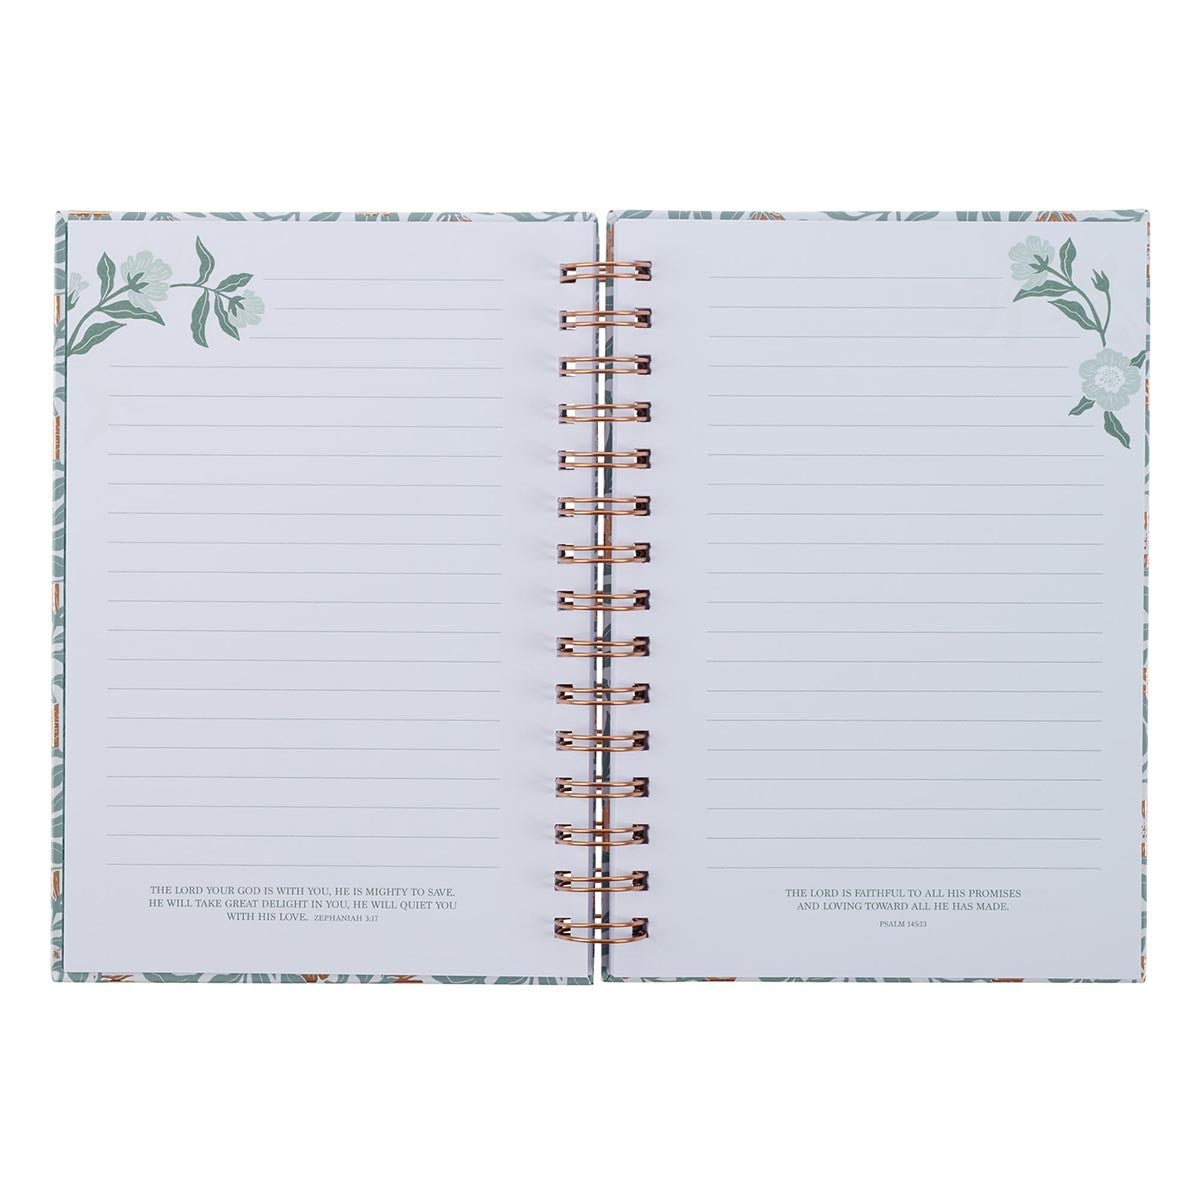 Sufficient Grace Teal Floral Large Wirebound Journal - 2 Corinthians 12:9 - The Christian Gift Company